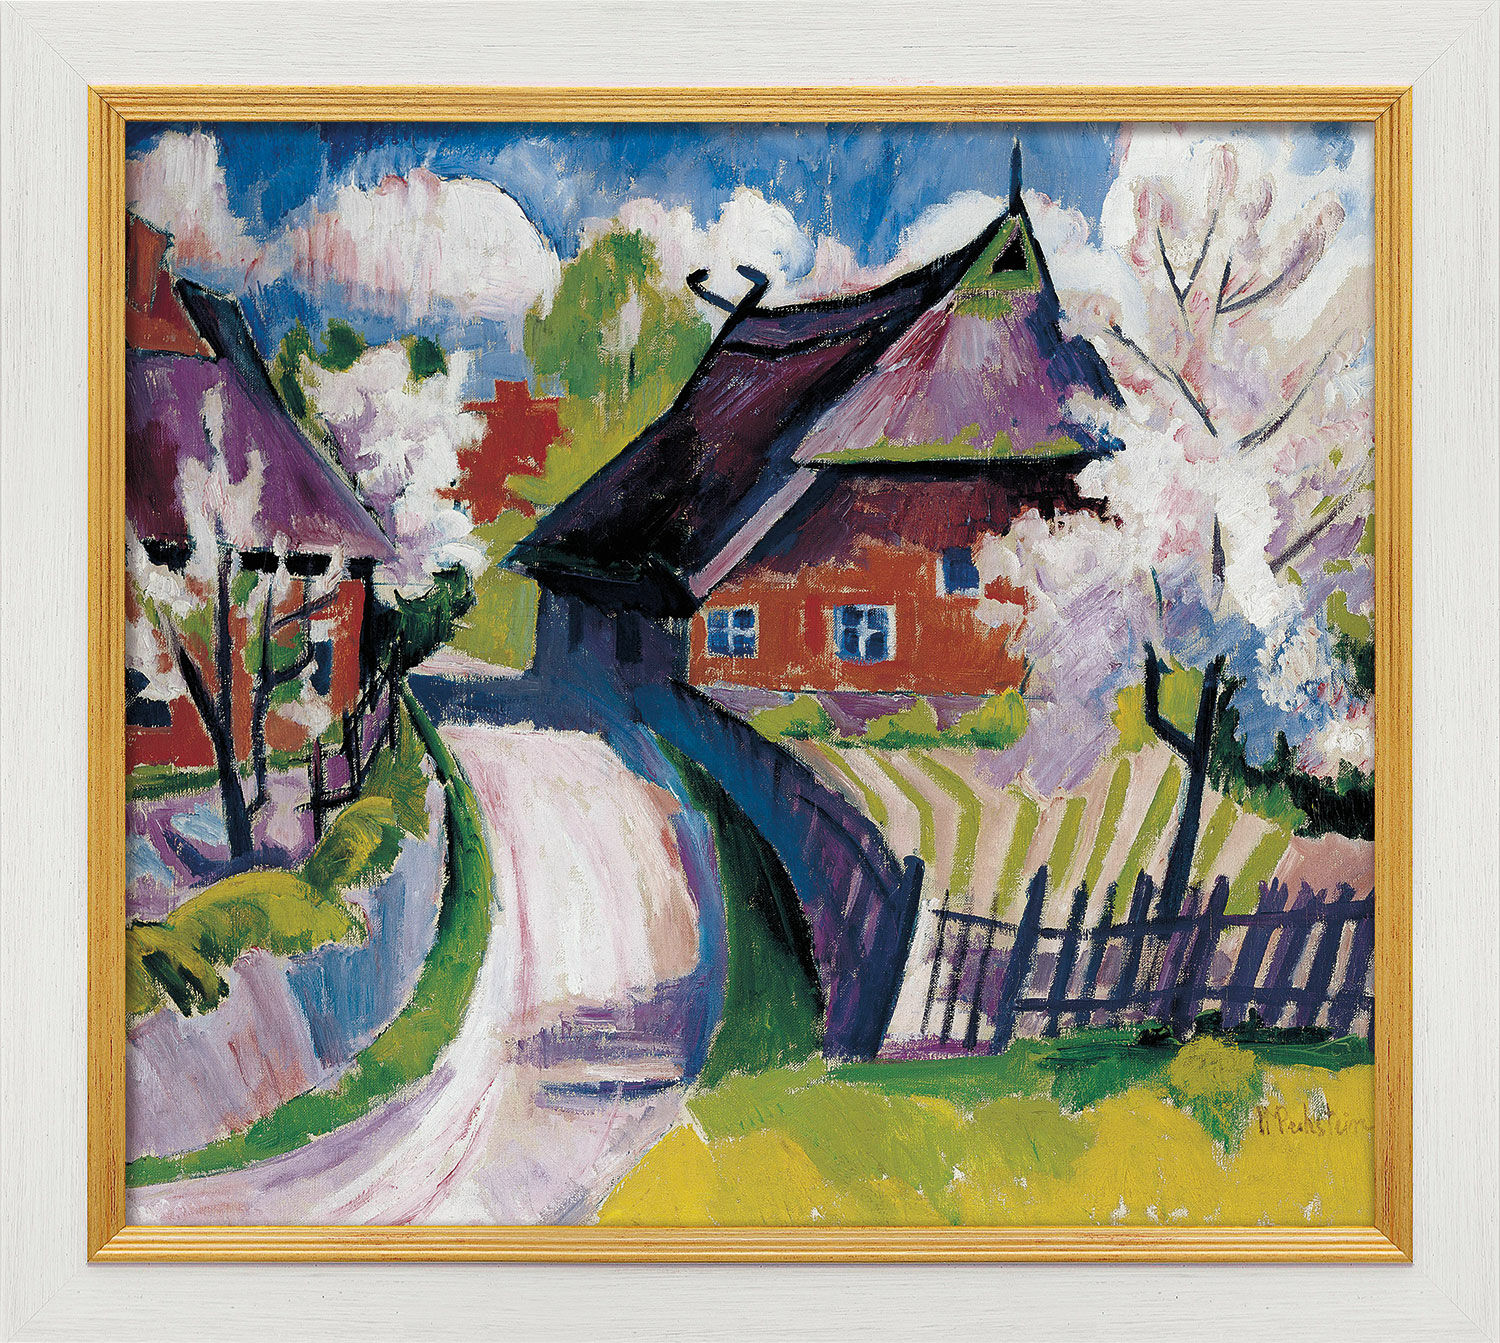 Picture "Spring Blossom" (c. 1919), white and golden framed version by Max Pechstein